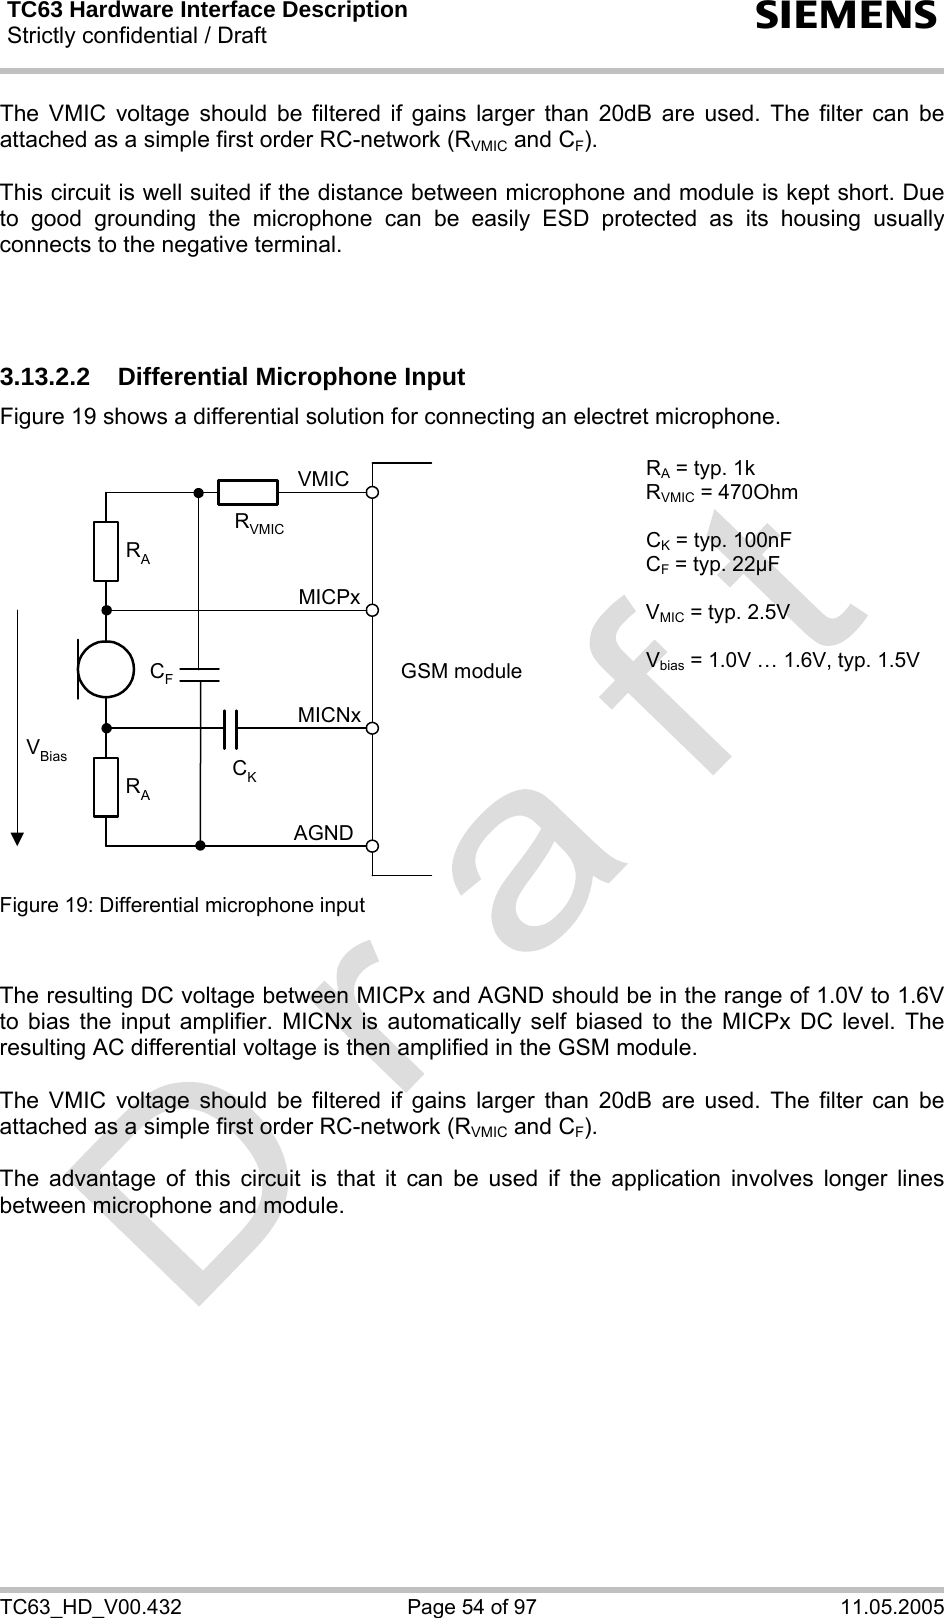 TC63 Hardware Interface Description Strictly confidential / Draft  s TC63_HD_V00.432  Page 54 of 97  11.05.2005 The VMIC voltage should be filtered if gains larger than 20dB are used. The filter can be attached as a simple first order RC-network (RVMIC and CF).  This circuit is well suited if the distance between microphone and module is kept short. Due to good grounding the microphone can be easily ESD protected as its housing usually connects to the negative terminal.     3.13.2.2  Differential Microphone Input Figure 19 shows a differential solution for connecting an electret microphone.   GSM moduleRARAVBias CKAGNDMICNxMICPxVMICCFRVMIC RA = typ. 1k RVMIC = 470Ohm  CK = typ. 100nF CF = typ. 22µF  VMIC = typ. 2.5V  Vbias = 1.0V … 1.6V, typ. 1.5V Figure 19: Differential microphone input     The resulting DC voltage between MICPx and AGND should be in the range of 1.0V to 1.6V to bias the input amplifier. MICNx is automatically self biased to the MICPx DC level. The resulting AC differential voltage is then amplified in the GSM module.   The VMIC voltage should be filtered if gains larger than 20dB are used. The filter can be attached as a simple first order RC-network (RVMIC and CF).  The advantage of this circuit is that it can be used if the application involves longer lines between microphone and module. 